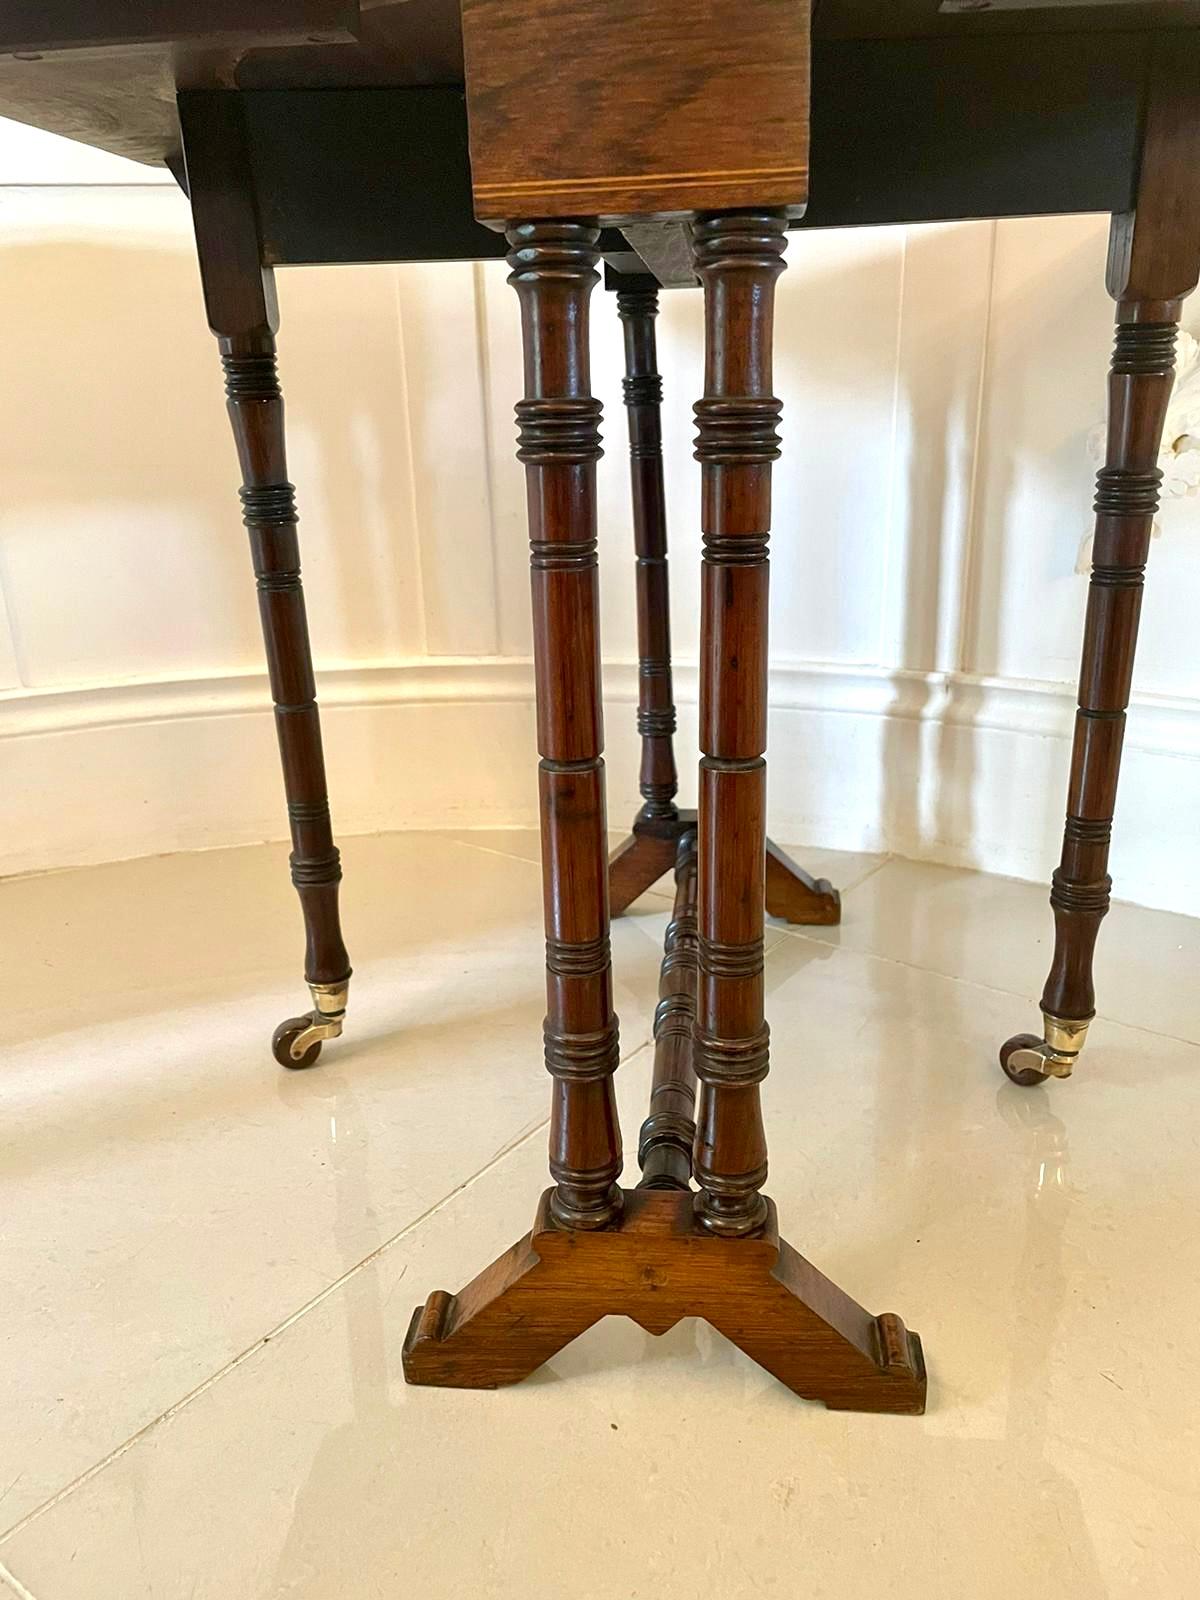 Quality antique Edwardian inlaid rosewood Sutherland table having a quality and beautifully inlaid rosewood top with two drop leaves and a moulded edge. It stands on turned end supports with two swing out gatelegs with original castors, shaped feet